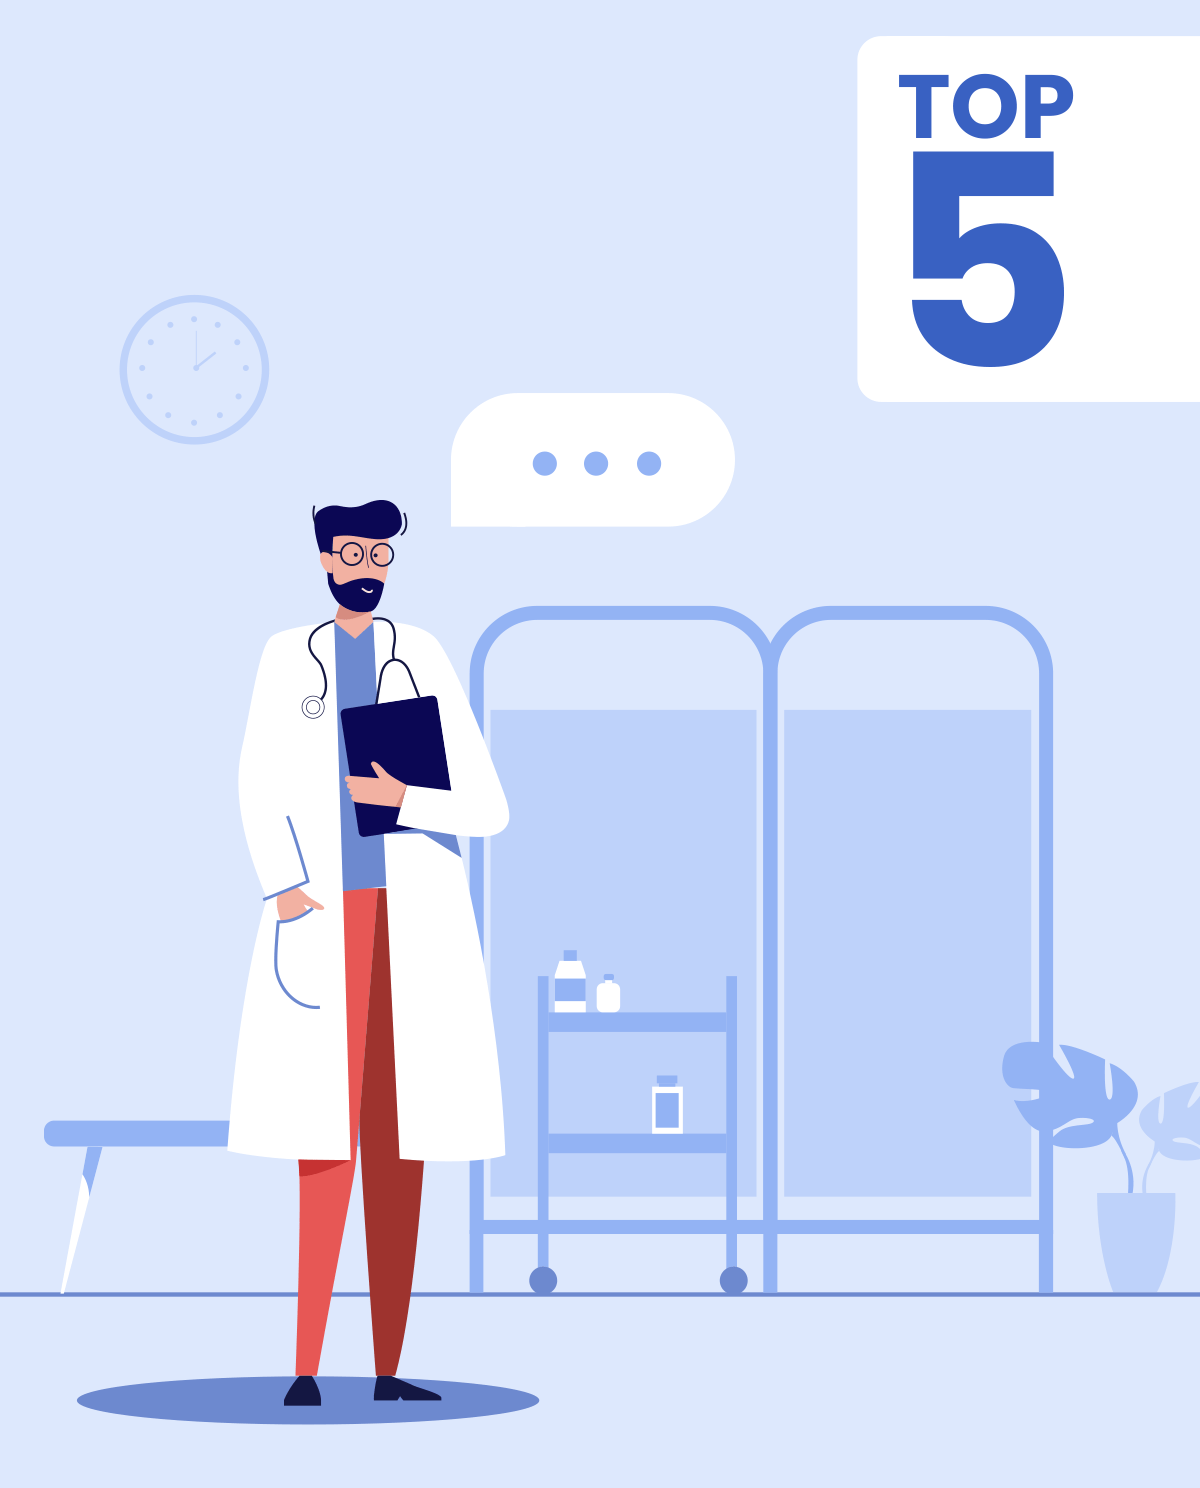 Top 5 questions you should ask your doctor before leaving your appointment